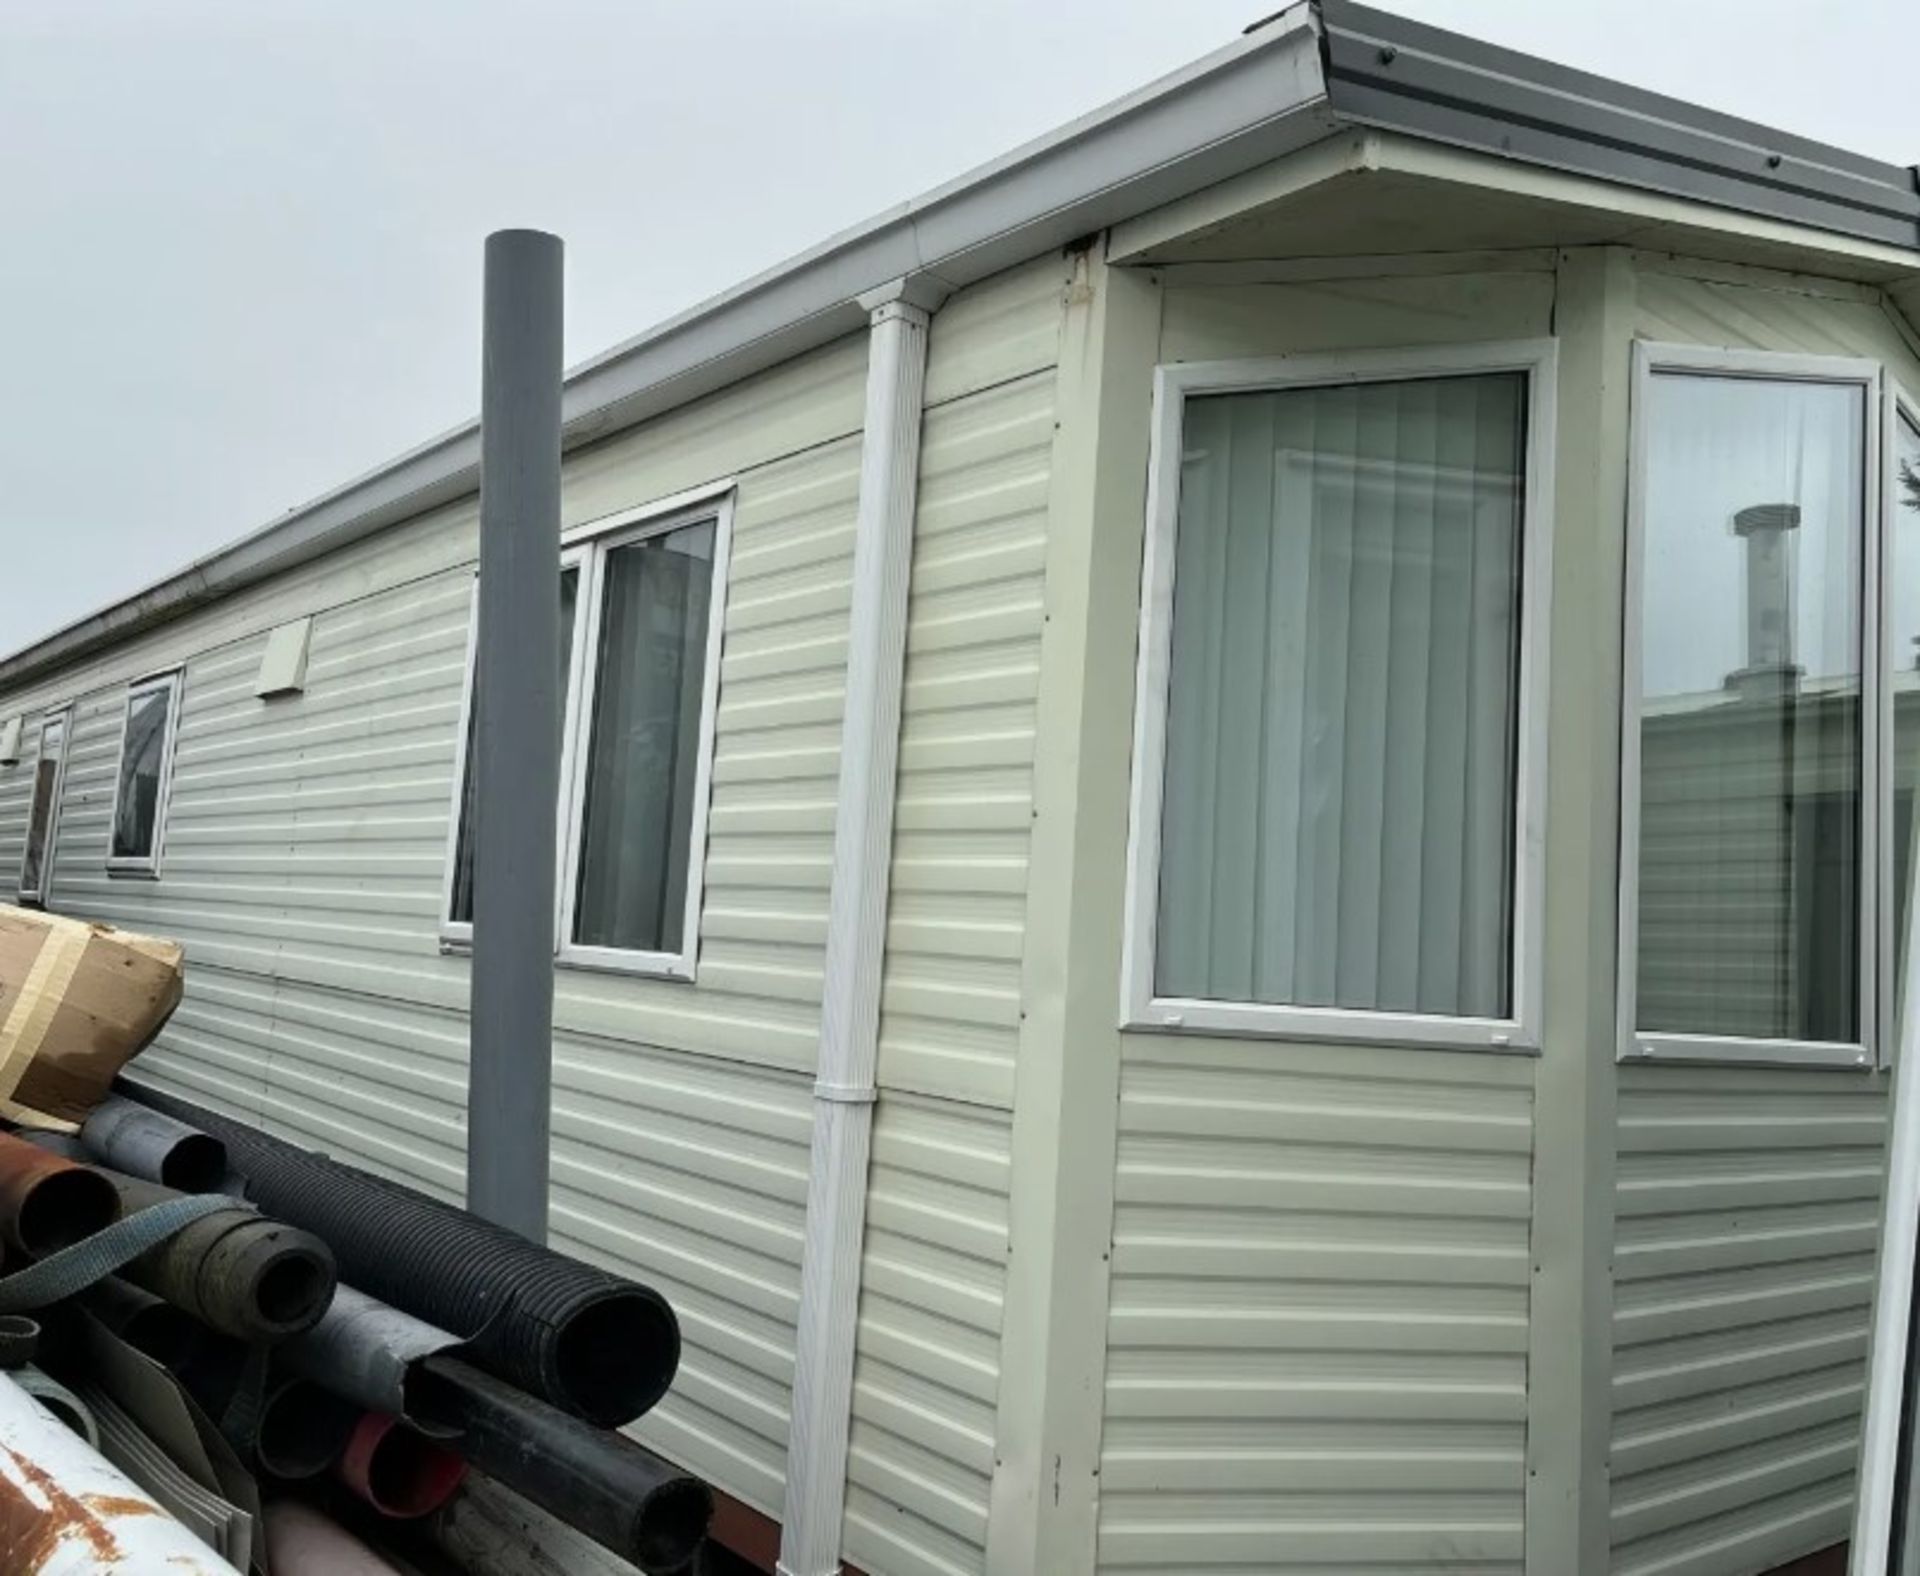 BK BLUEBIRD CAPRICE STATIC CARAVAN - YOUR GATEWAY TO MODERN LIVING AND COMFORT - Image 5 of 24